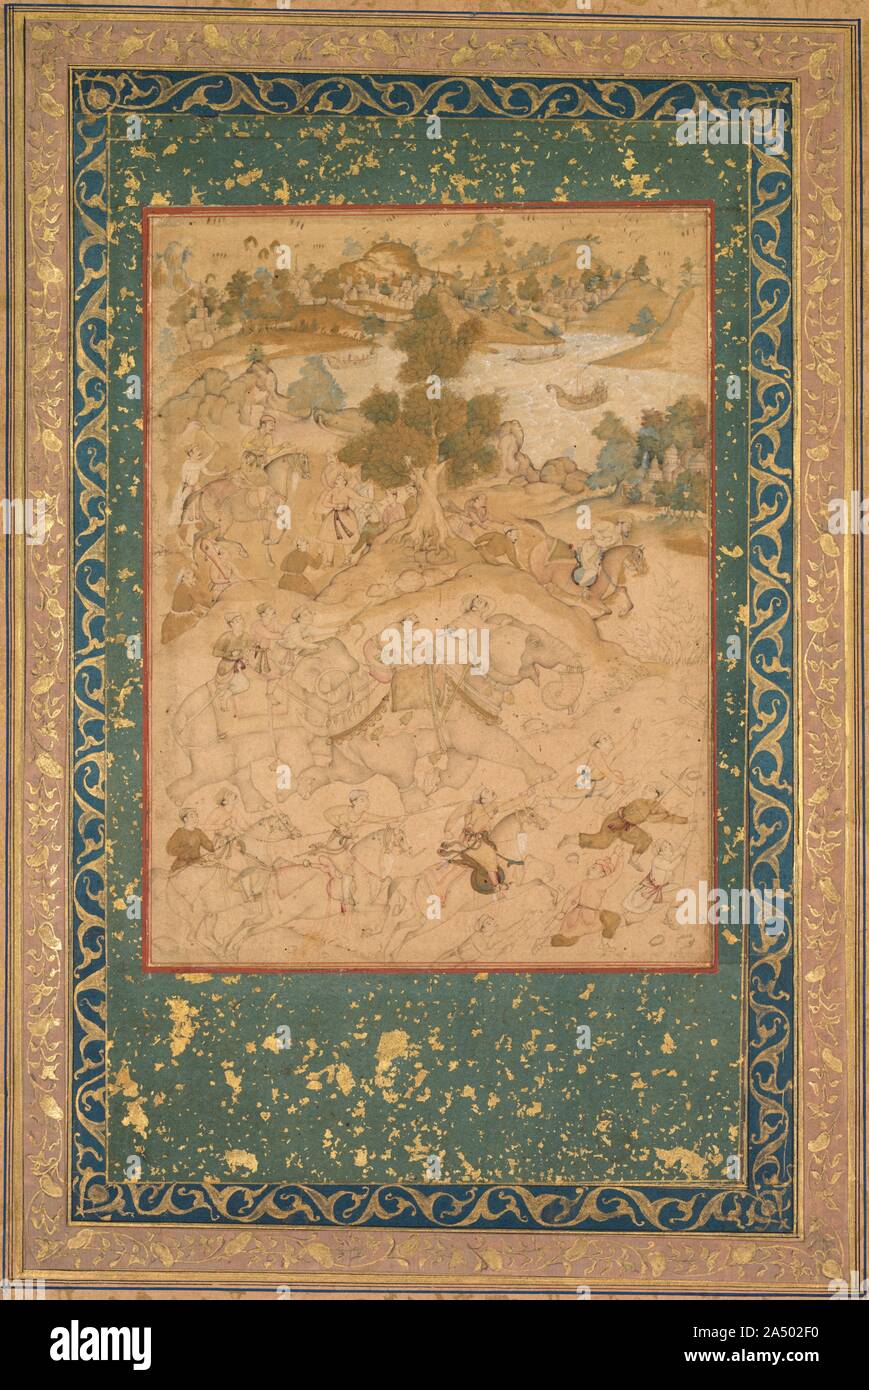 Akbar supervising the capture of wild elephants at Malwa in 1564, painting 90 from an Akbar-nama (Book of Akbar) of Abu&#x2019;l Fazl (Indian 1551-1602), c. 1602-3; borders added c. 1700s. This painting is from a biography of Akbar made shortly before his death. It depicts a historical event from early in his reign when he encountered a herd of wild elephants and captured many of them for his royal stables. Akbar rides horseback in the upper left, directing his men as two trained elephants give chase in the foreground. The Mughals caught wild elephants by chasing them with tame elephants, then Stock Photo